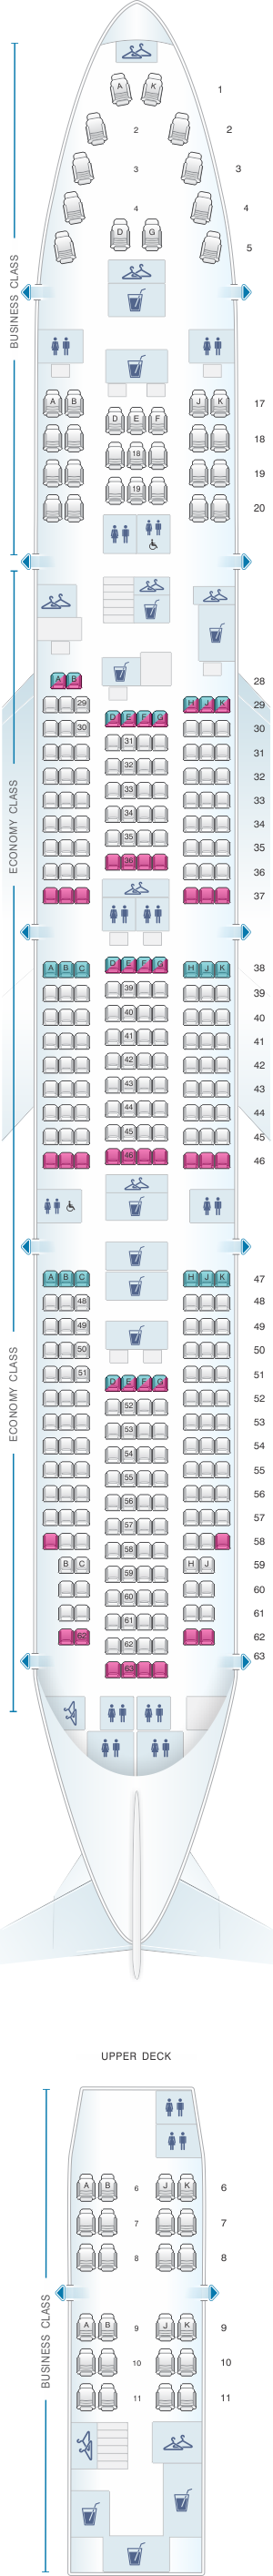 China Airlines A350 Seat Map Tutor Suhu